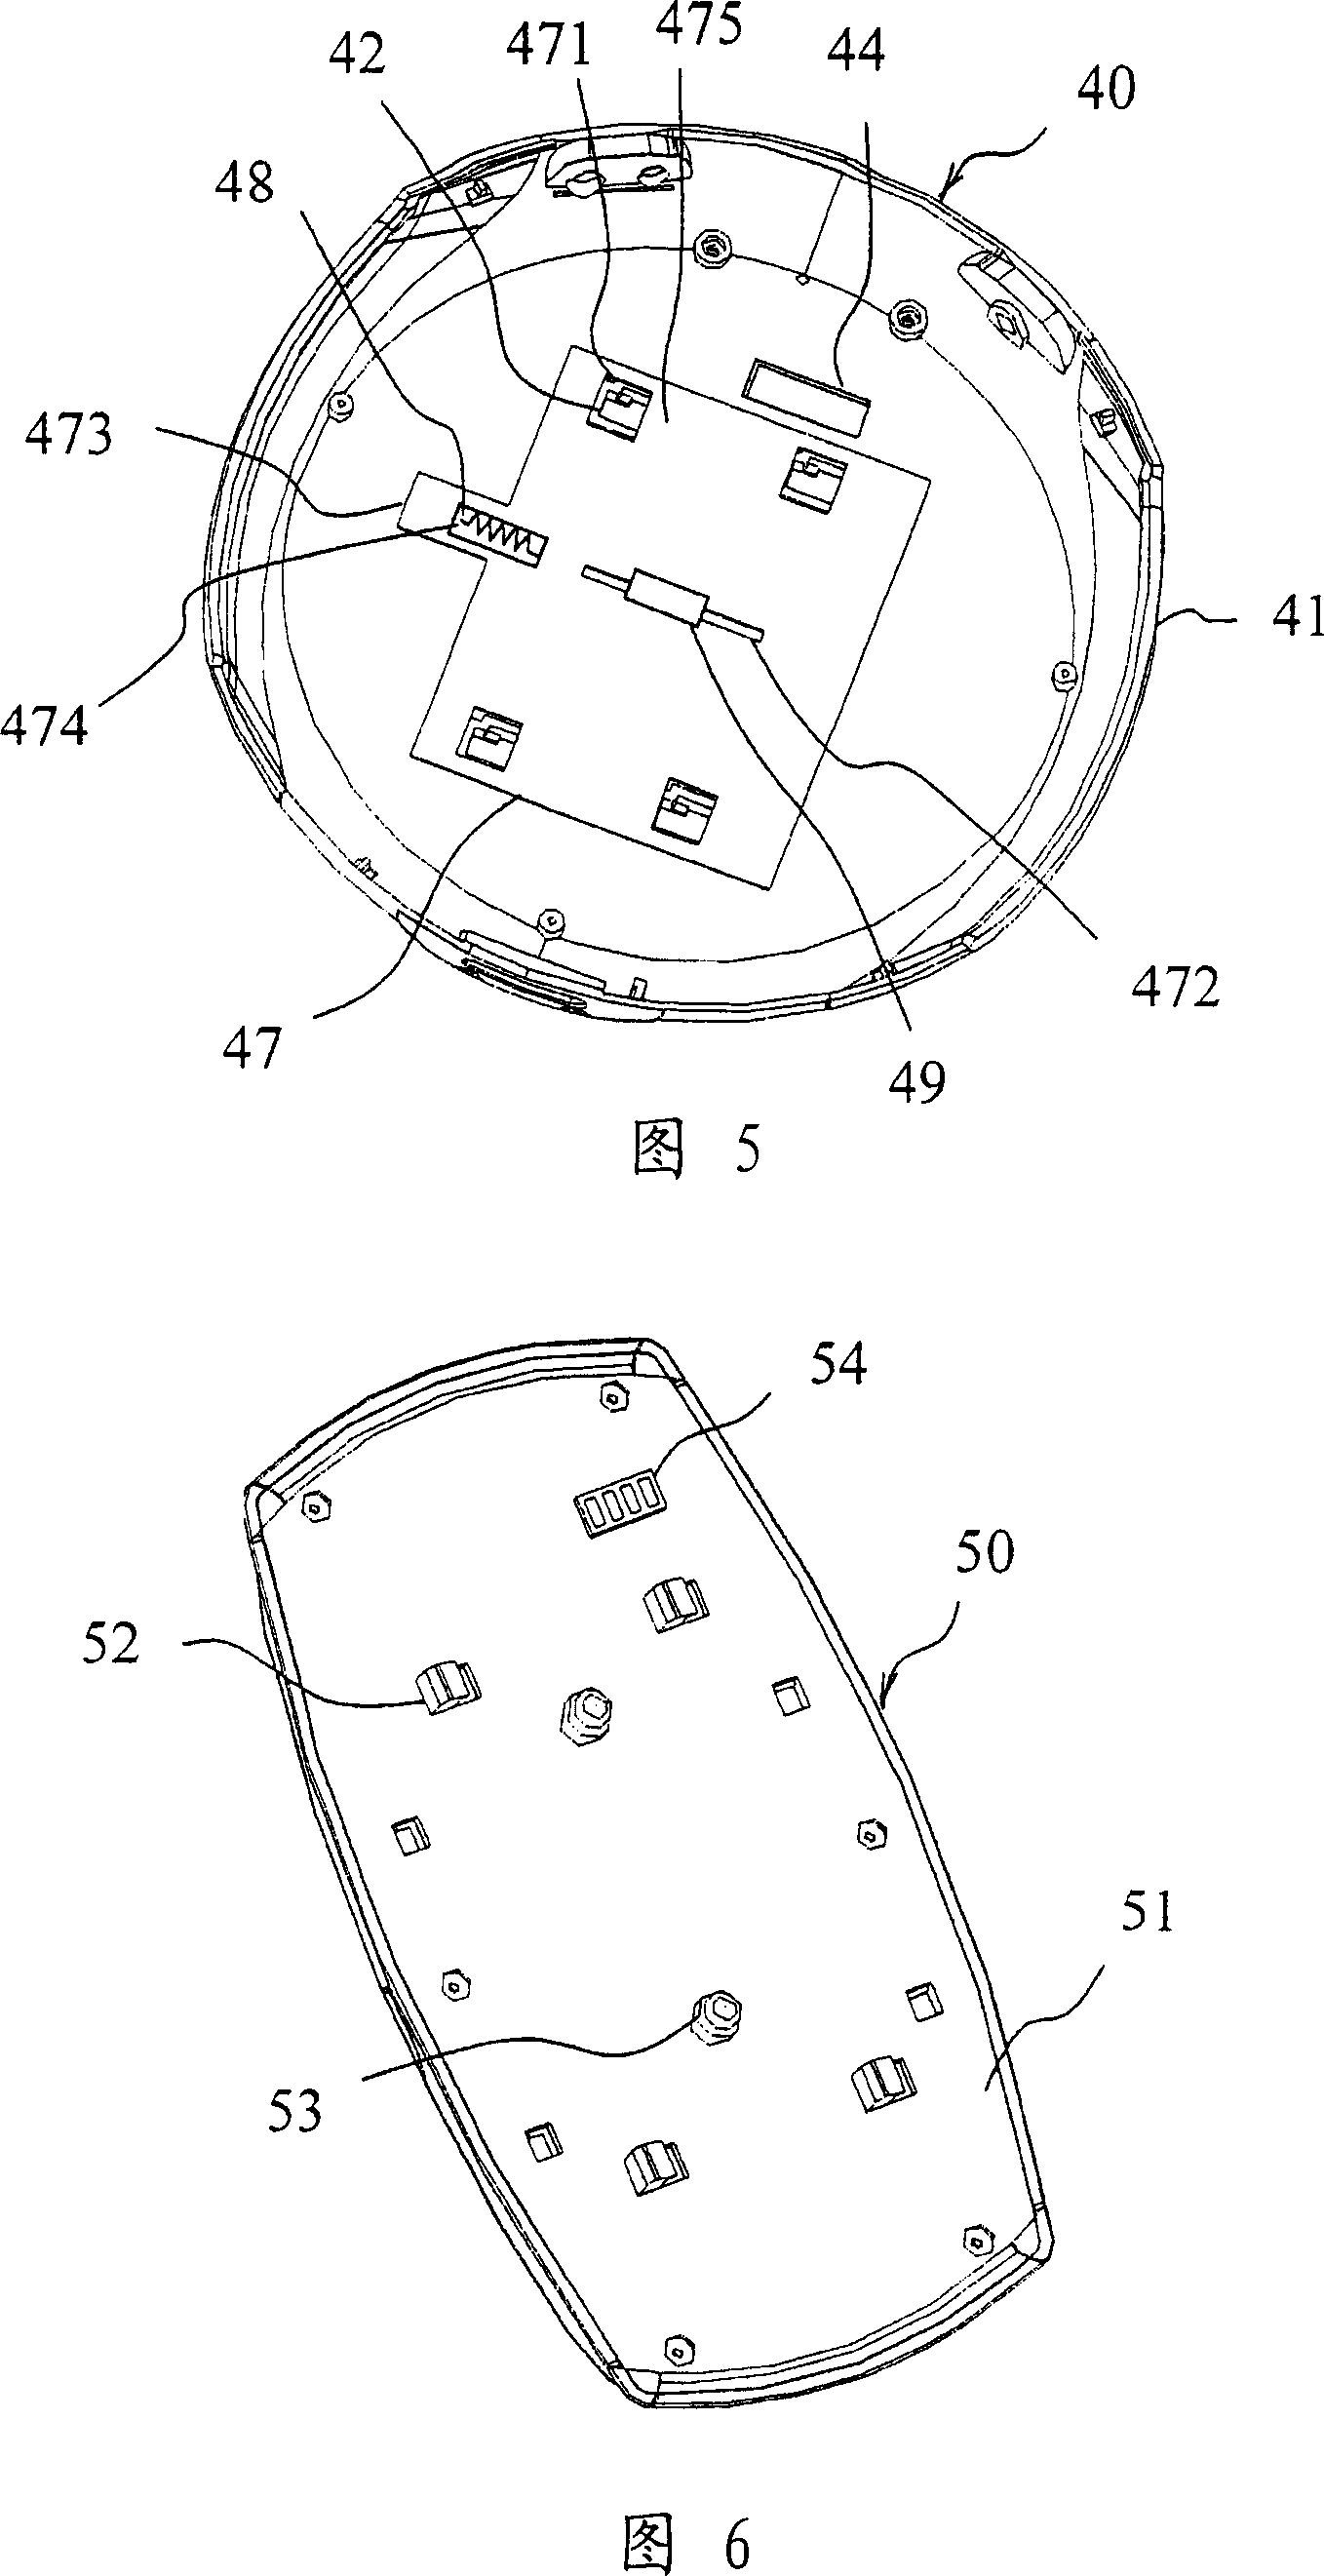 Separation and reunion structure for fittings